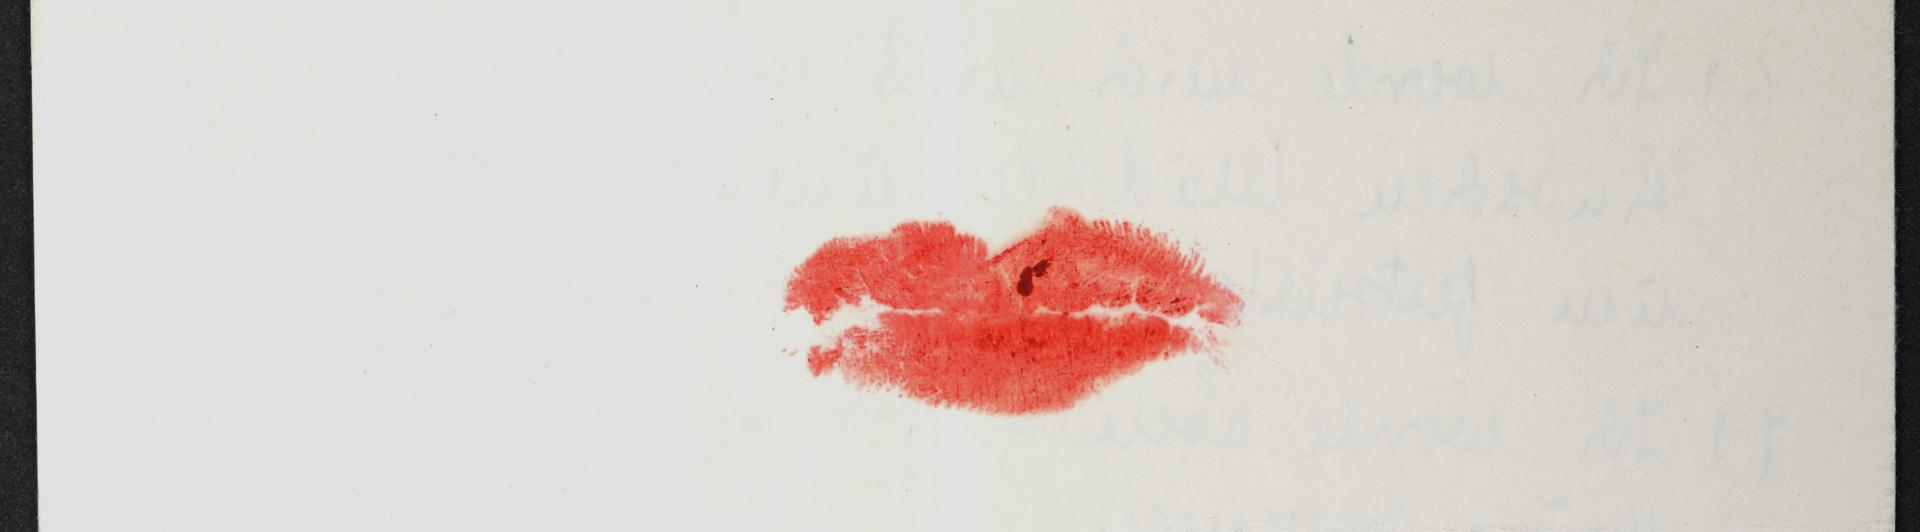 Imprint of a Kiss with red lipstick